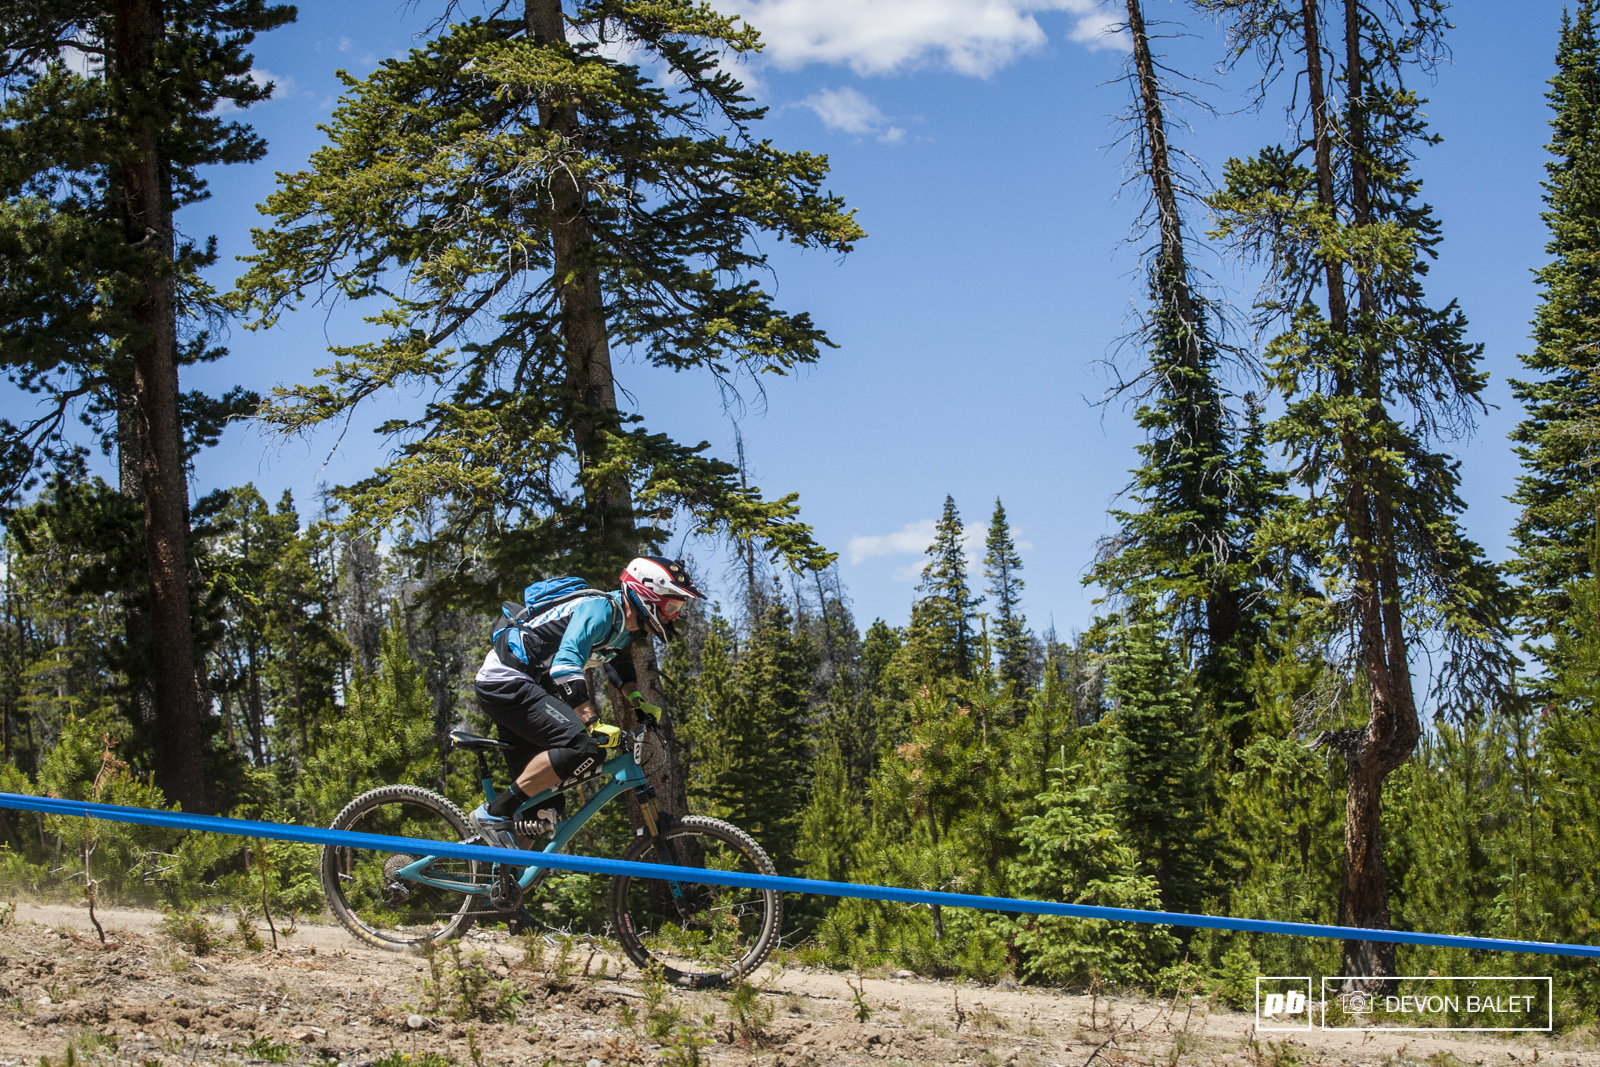 Dee Tidwell runs Enduro MTB Training and proves his worth with finishing second in Master's Men 40+.